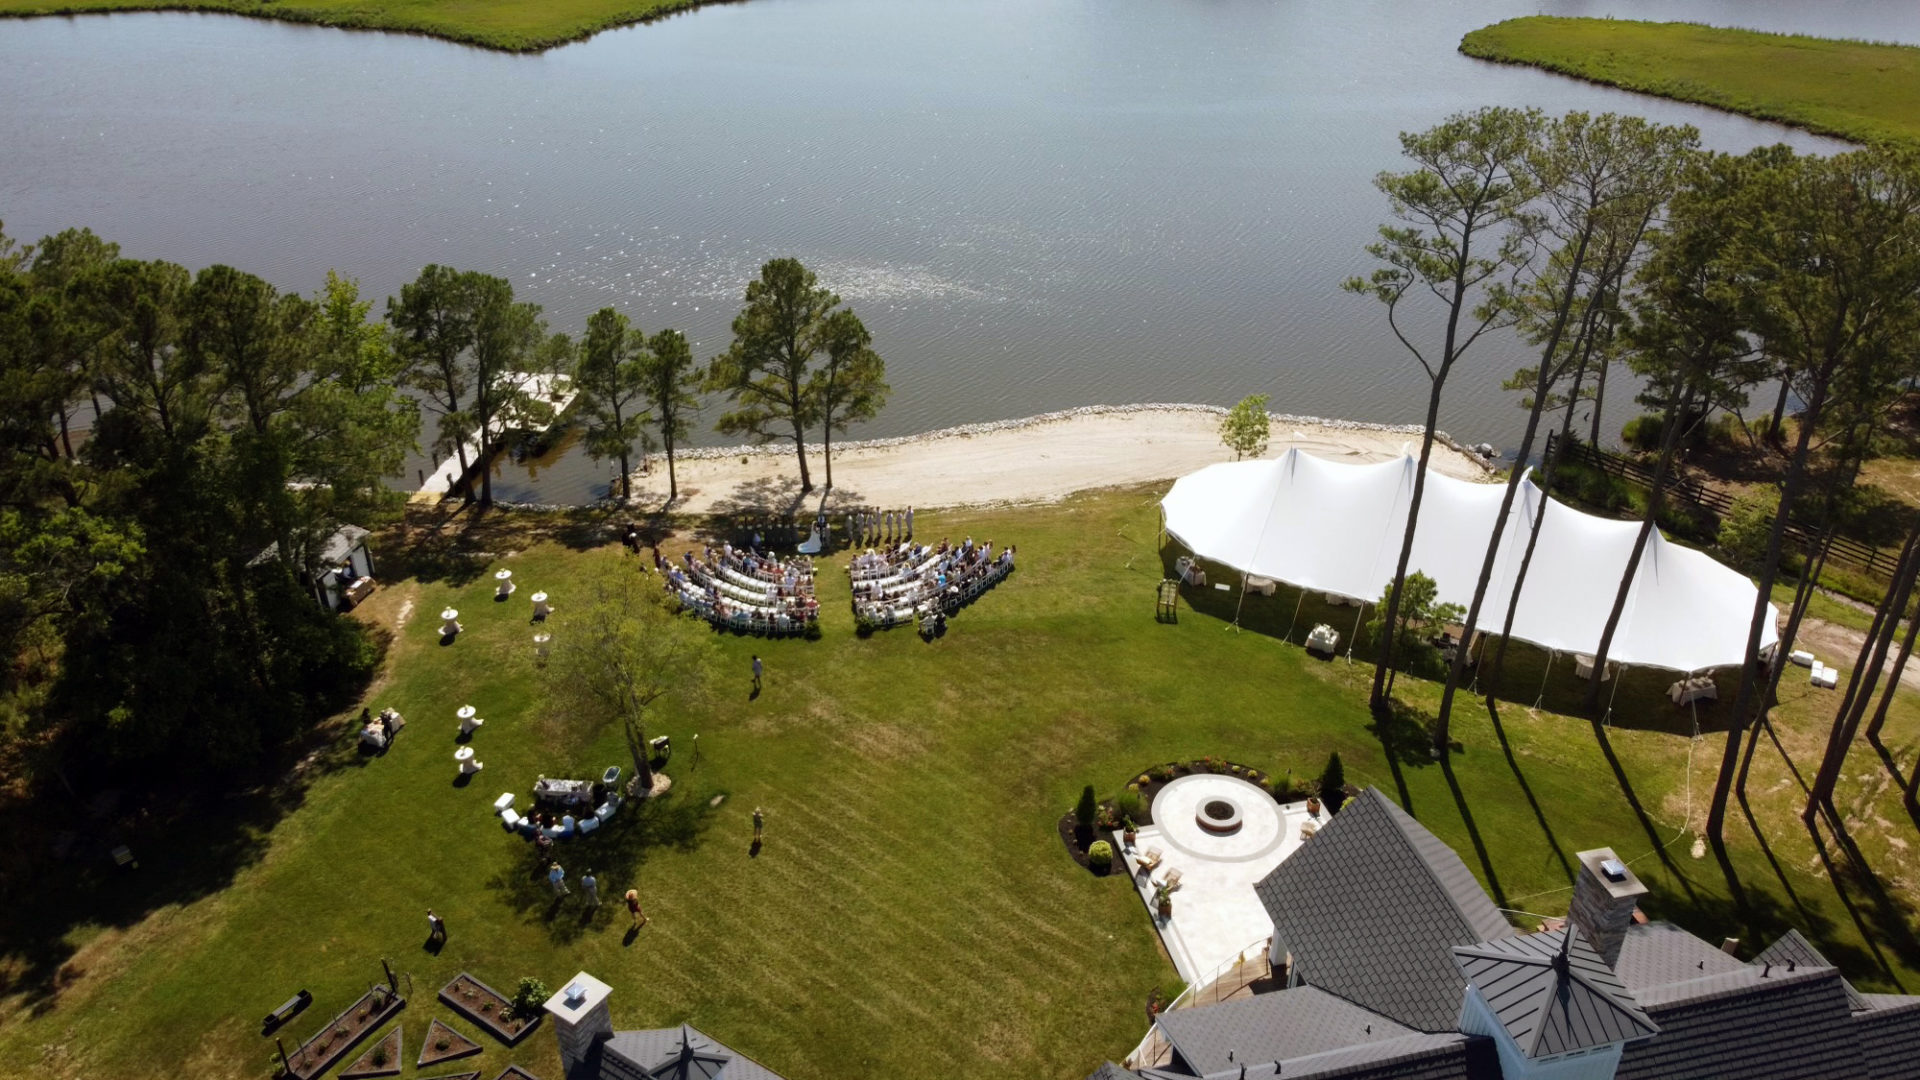 Aeiral image of a Coasta Tented Event